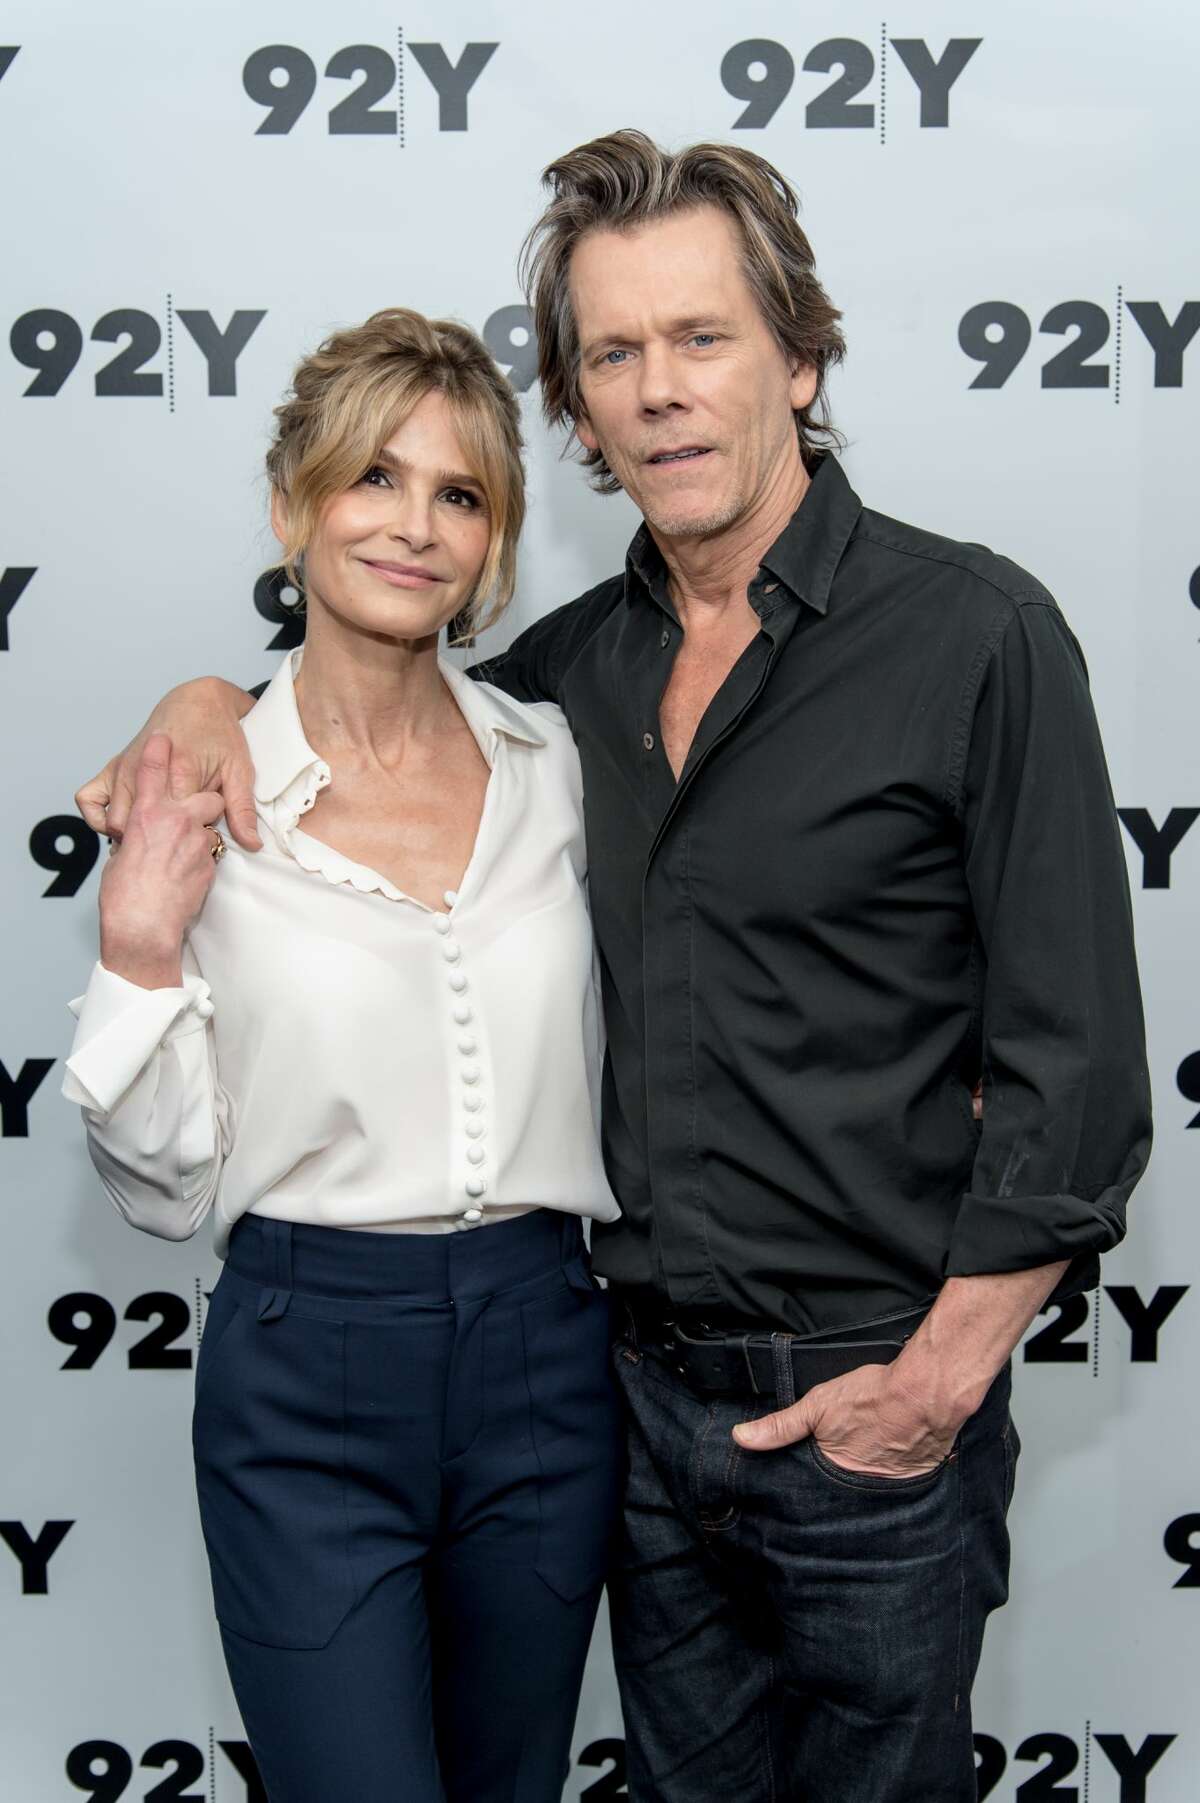 NEW YORK, NY - JULY 19: Actors Kyra Sedgwick and Kevin Bacon in Conversation at 92nd Street Y on July 19, 2017 in New York City. (Photo by Mark Sagliocco/FilmMagic)